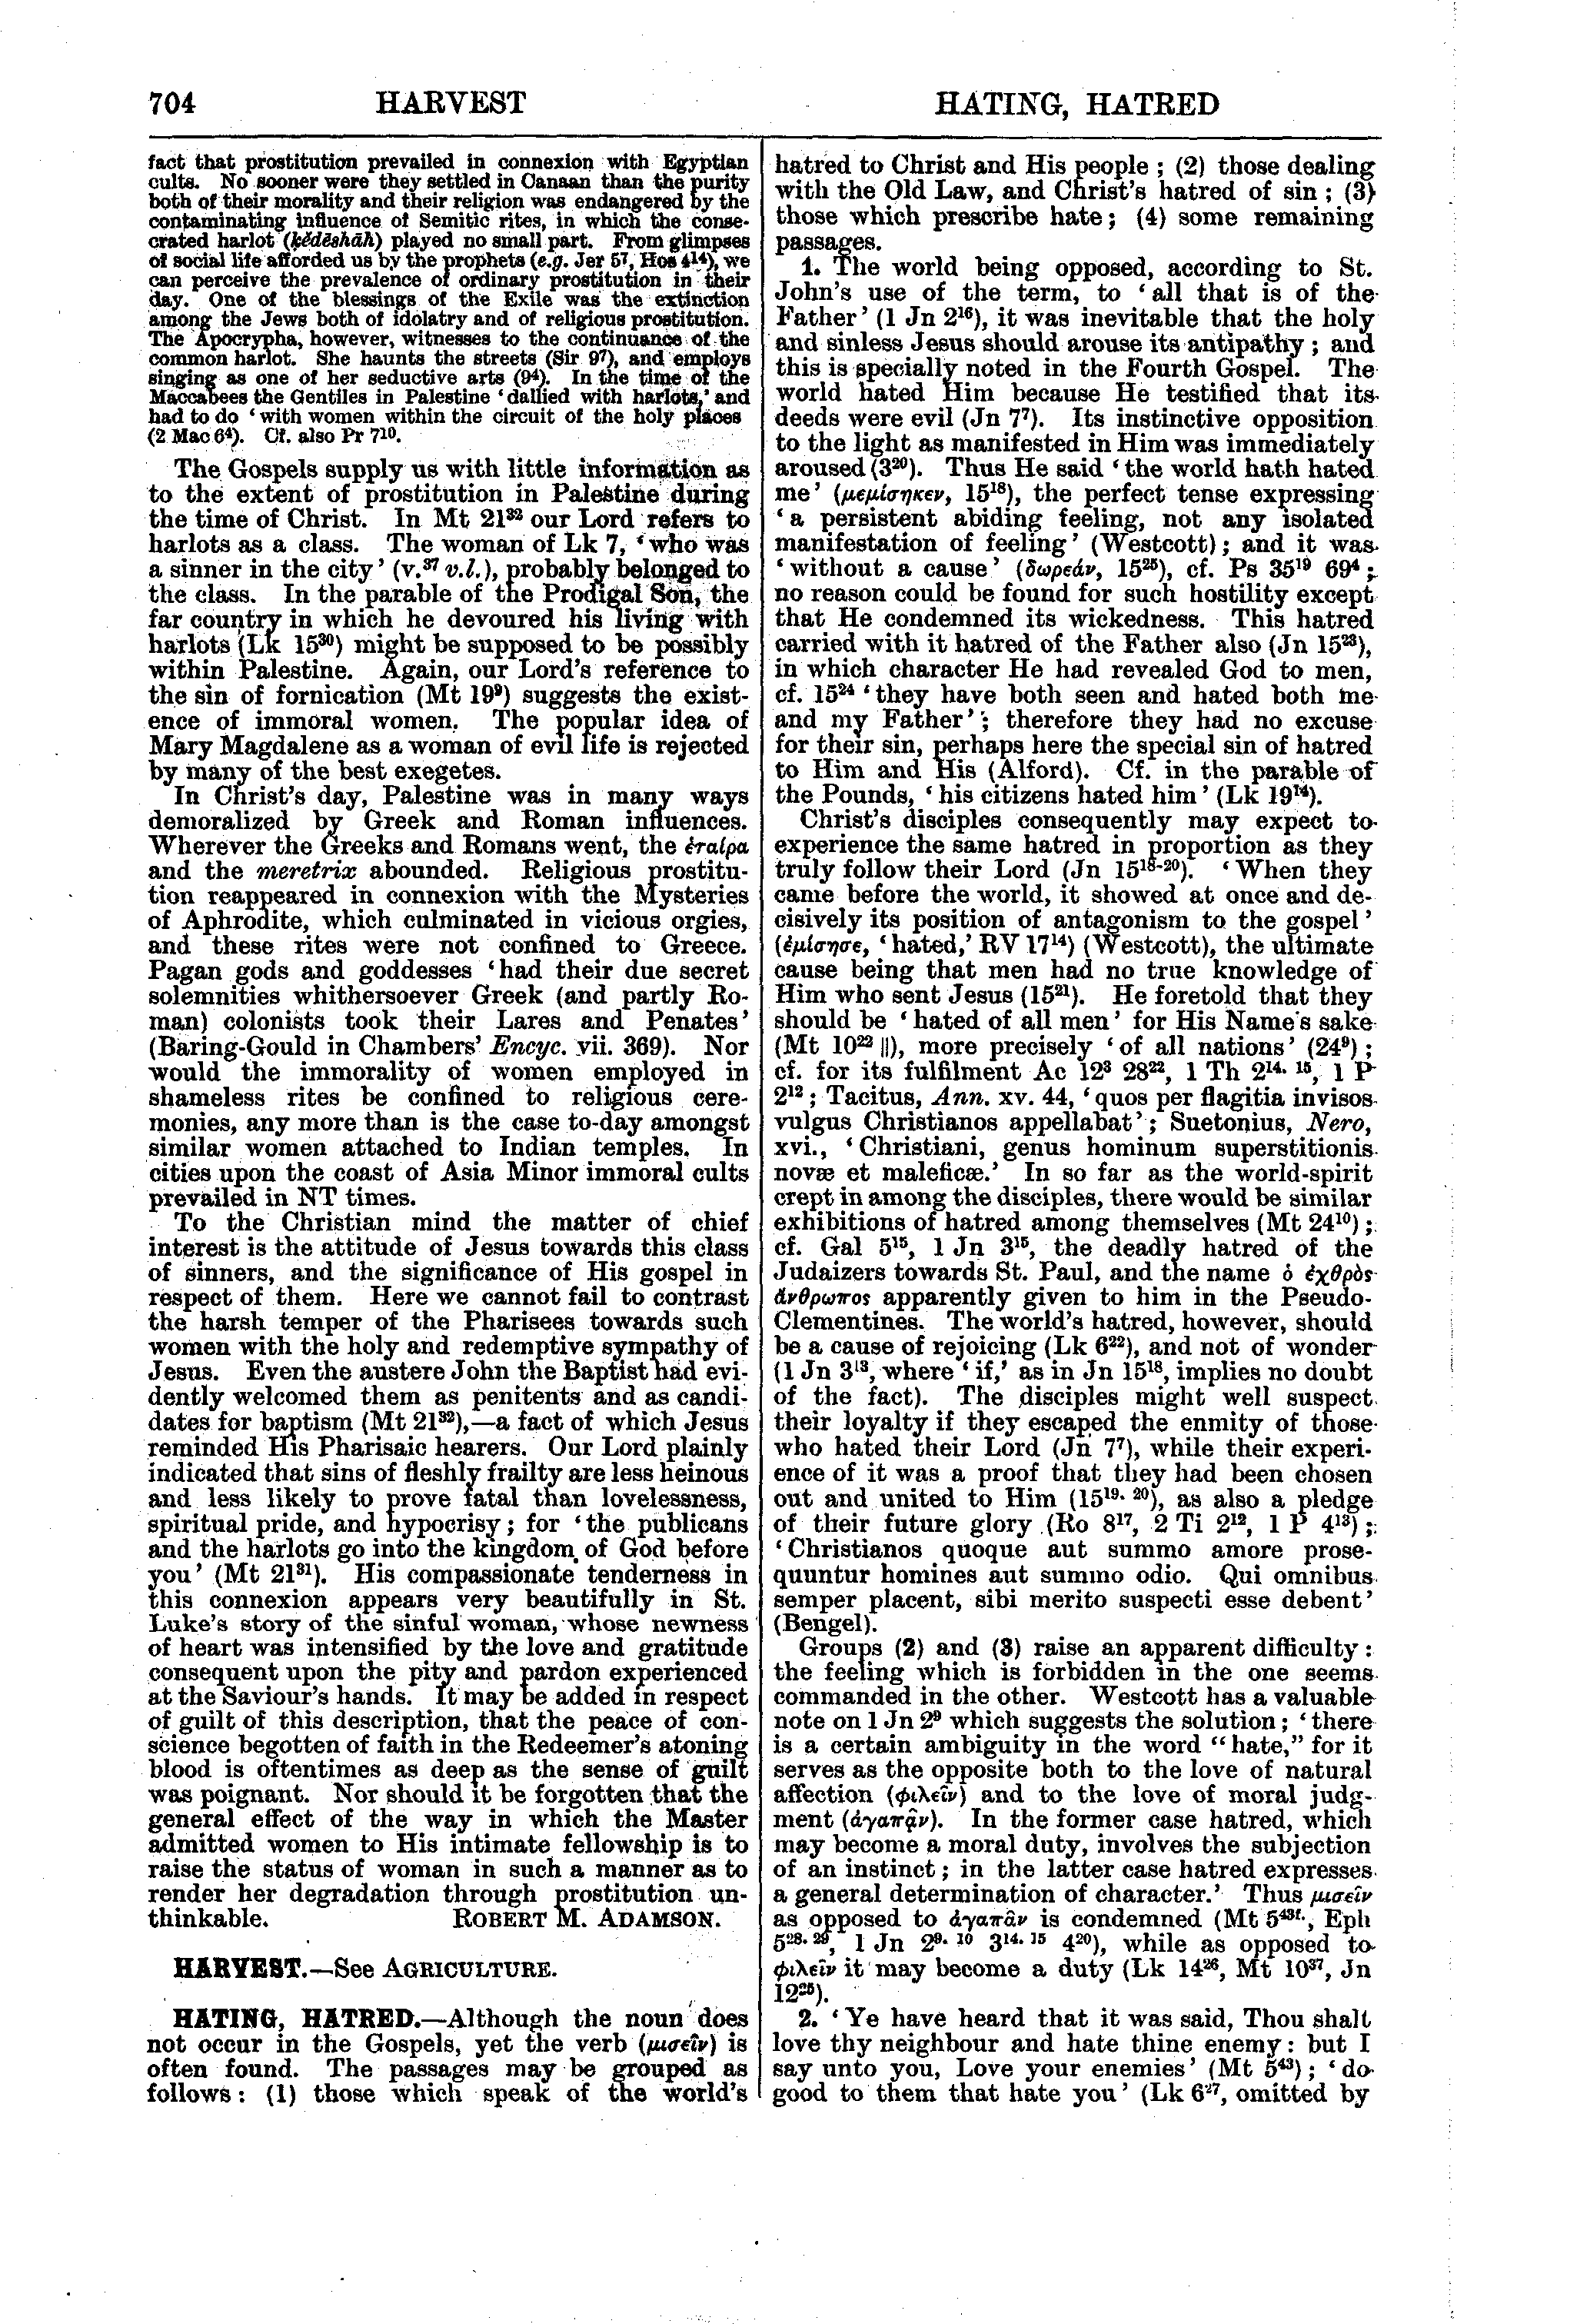 Image of page 704